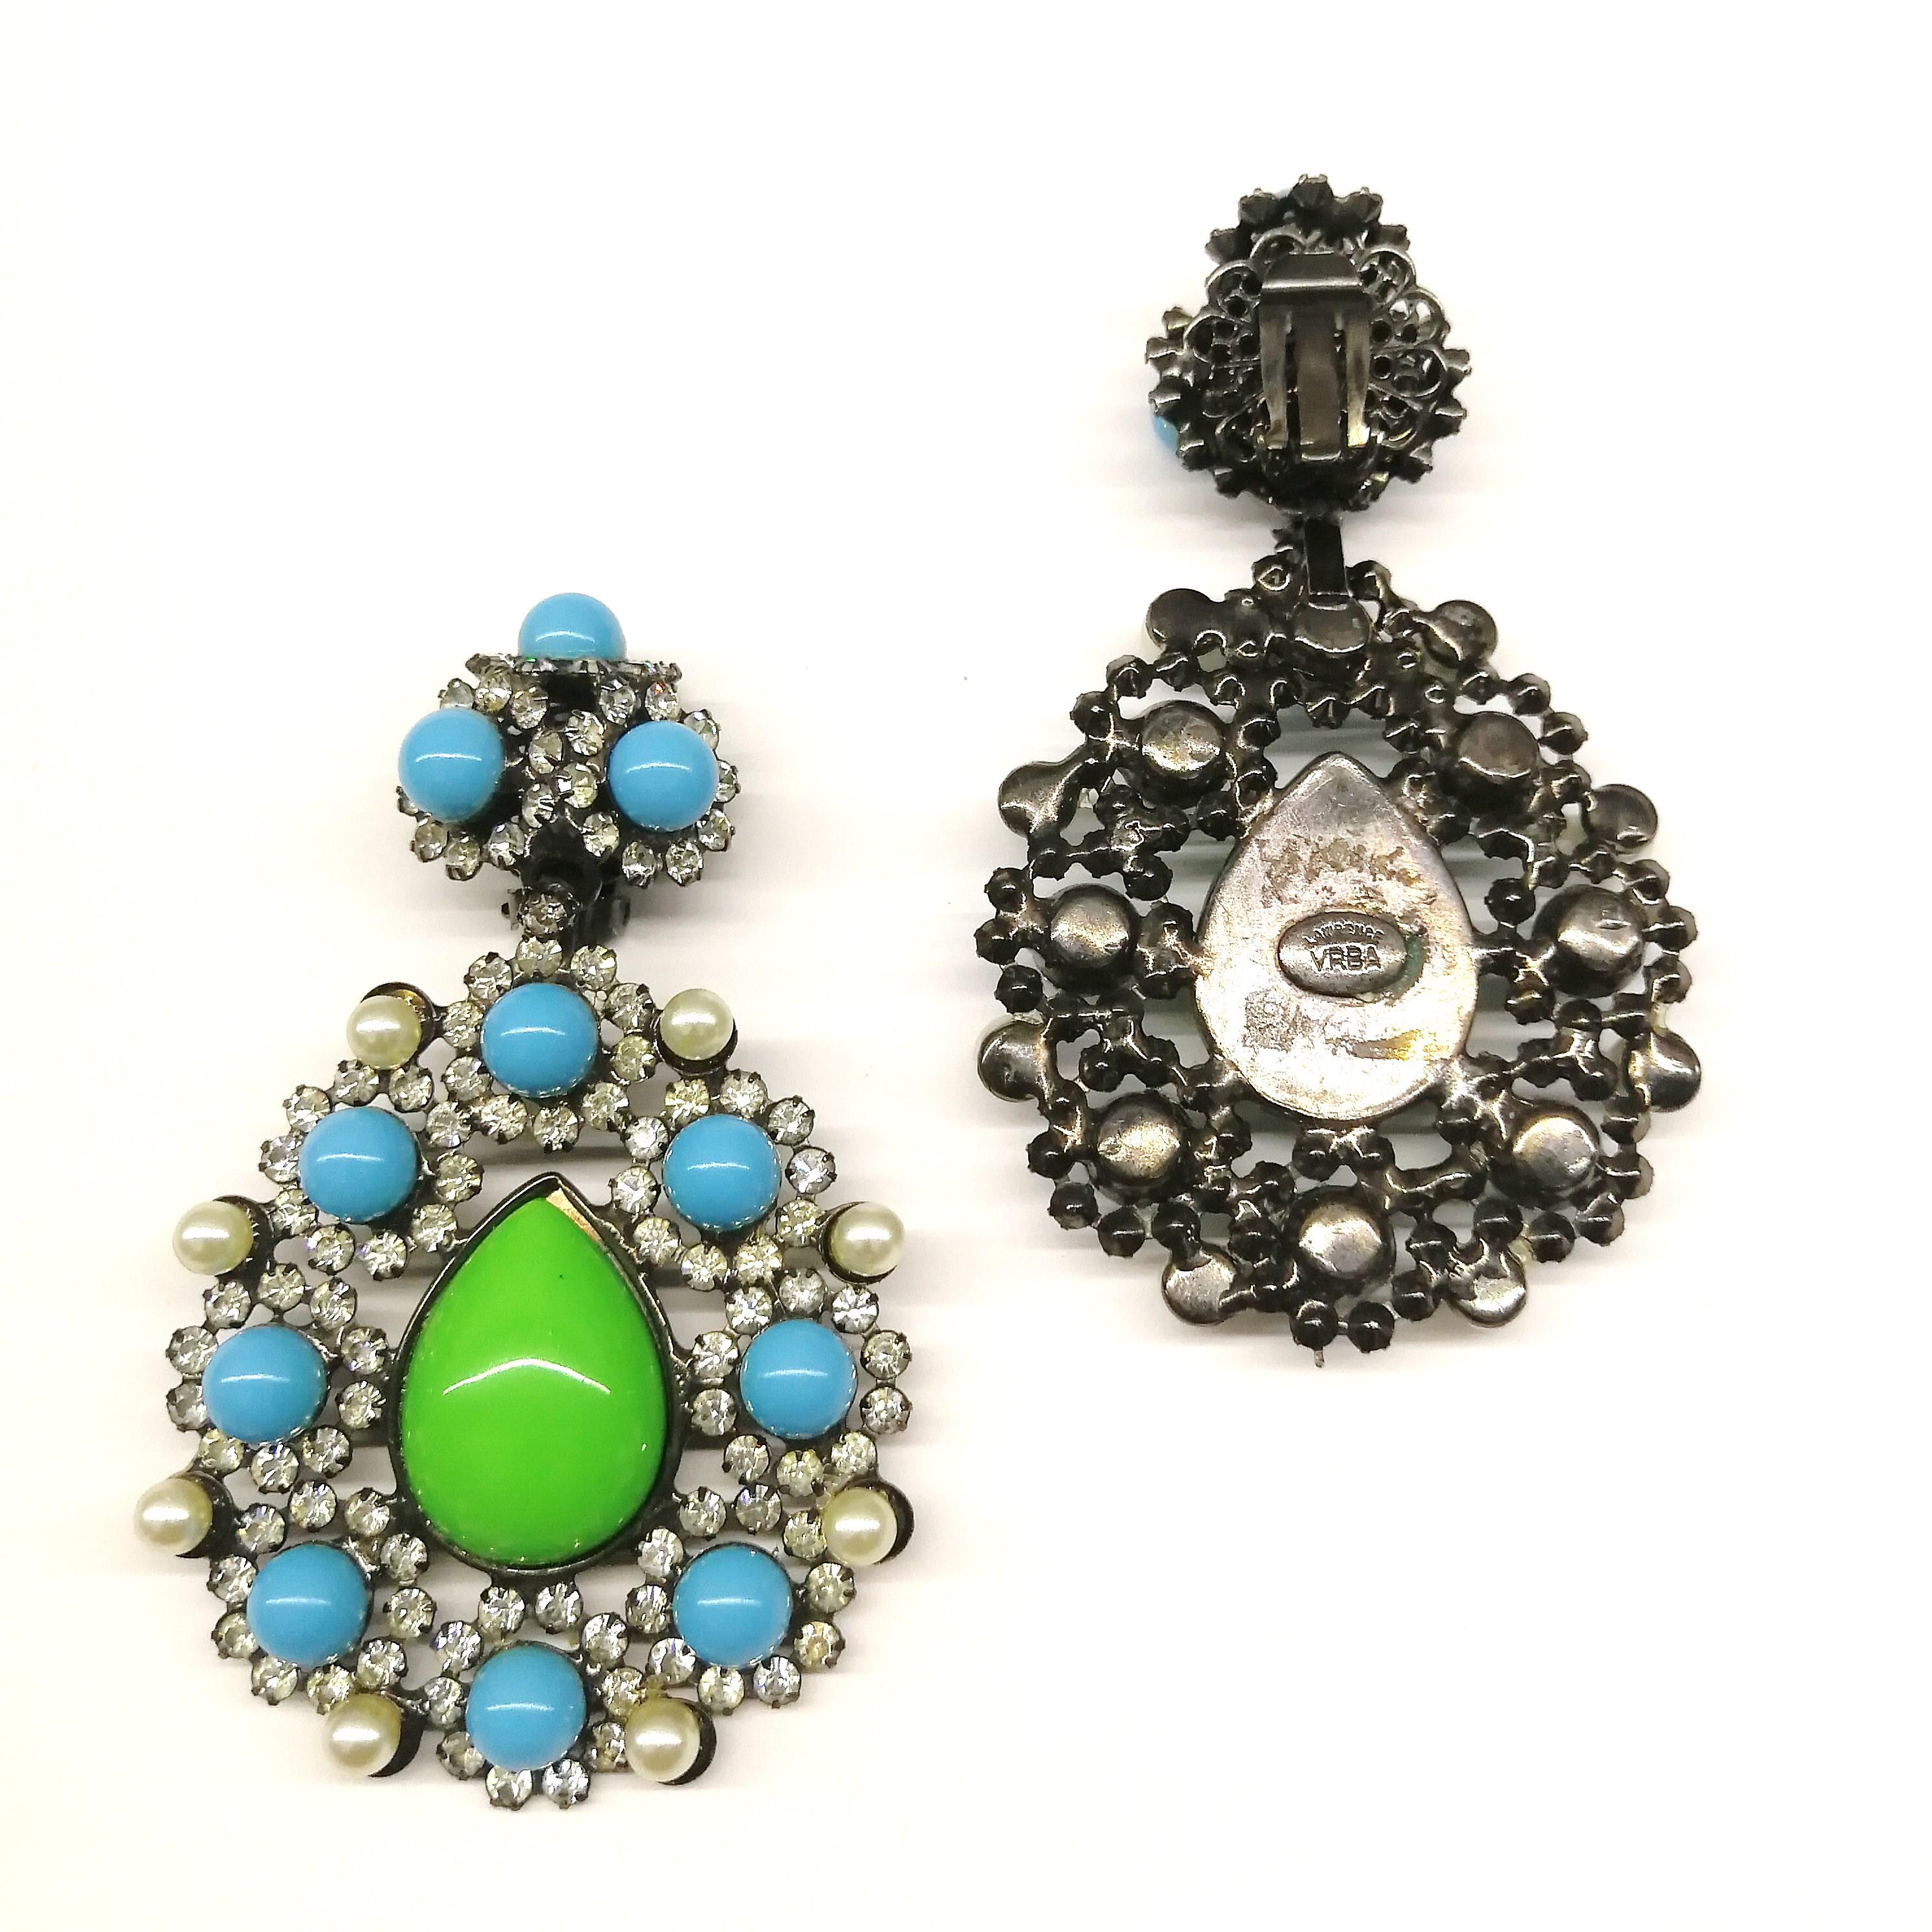 A very striking and exuberant pair of earrings from Lawrence Vrba, the celebrated designer, in a strong colour combination, highlighted and softened by pearls, very reminiscent of 1960s designs. Very glamorous and eye catching, these earrings are